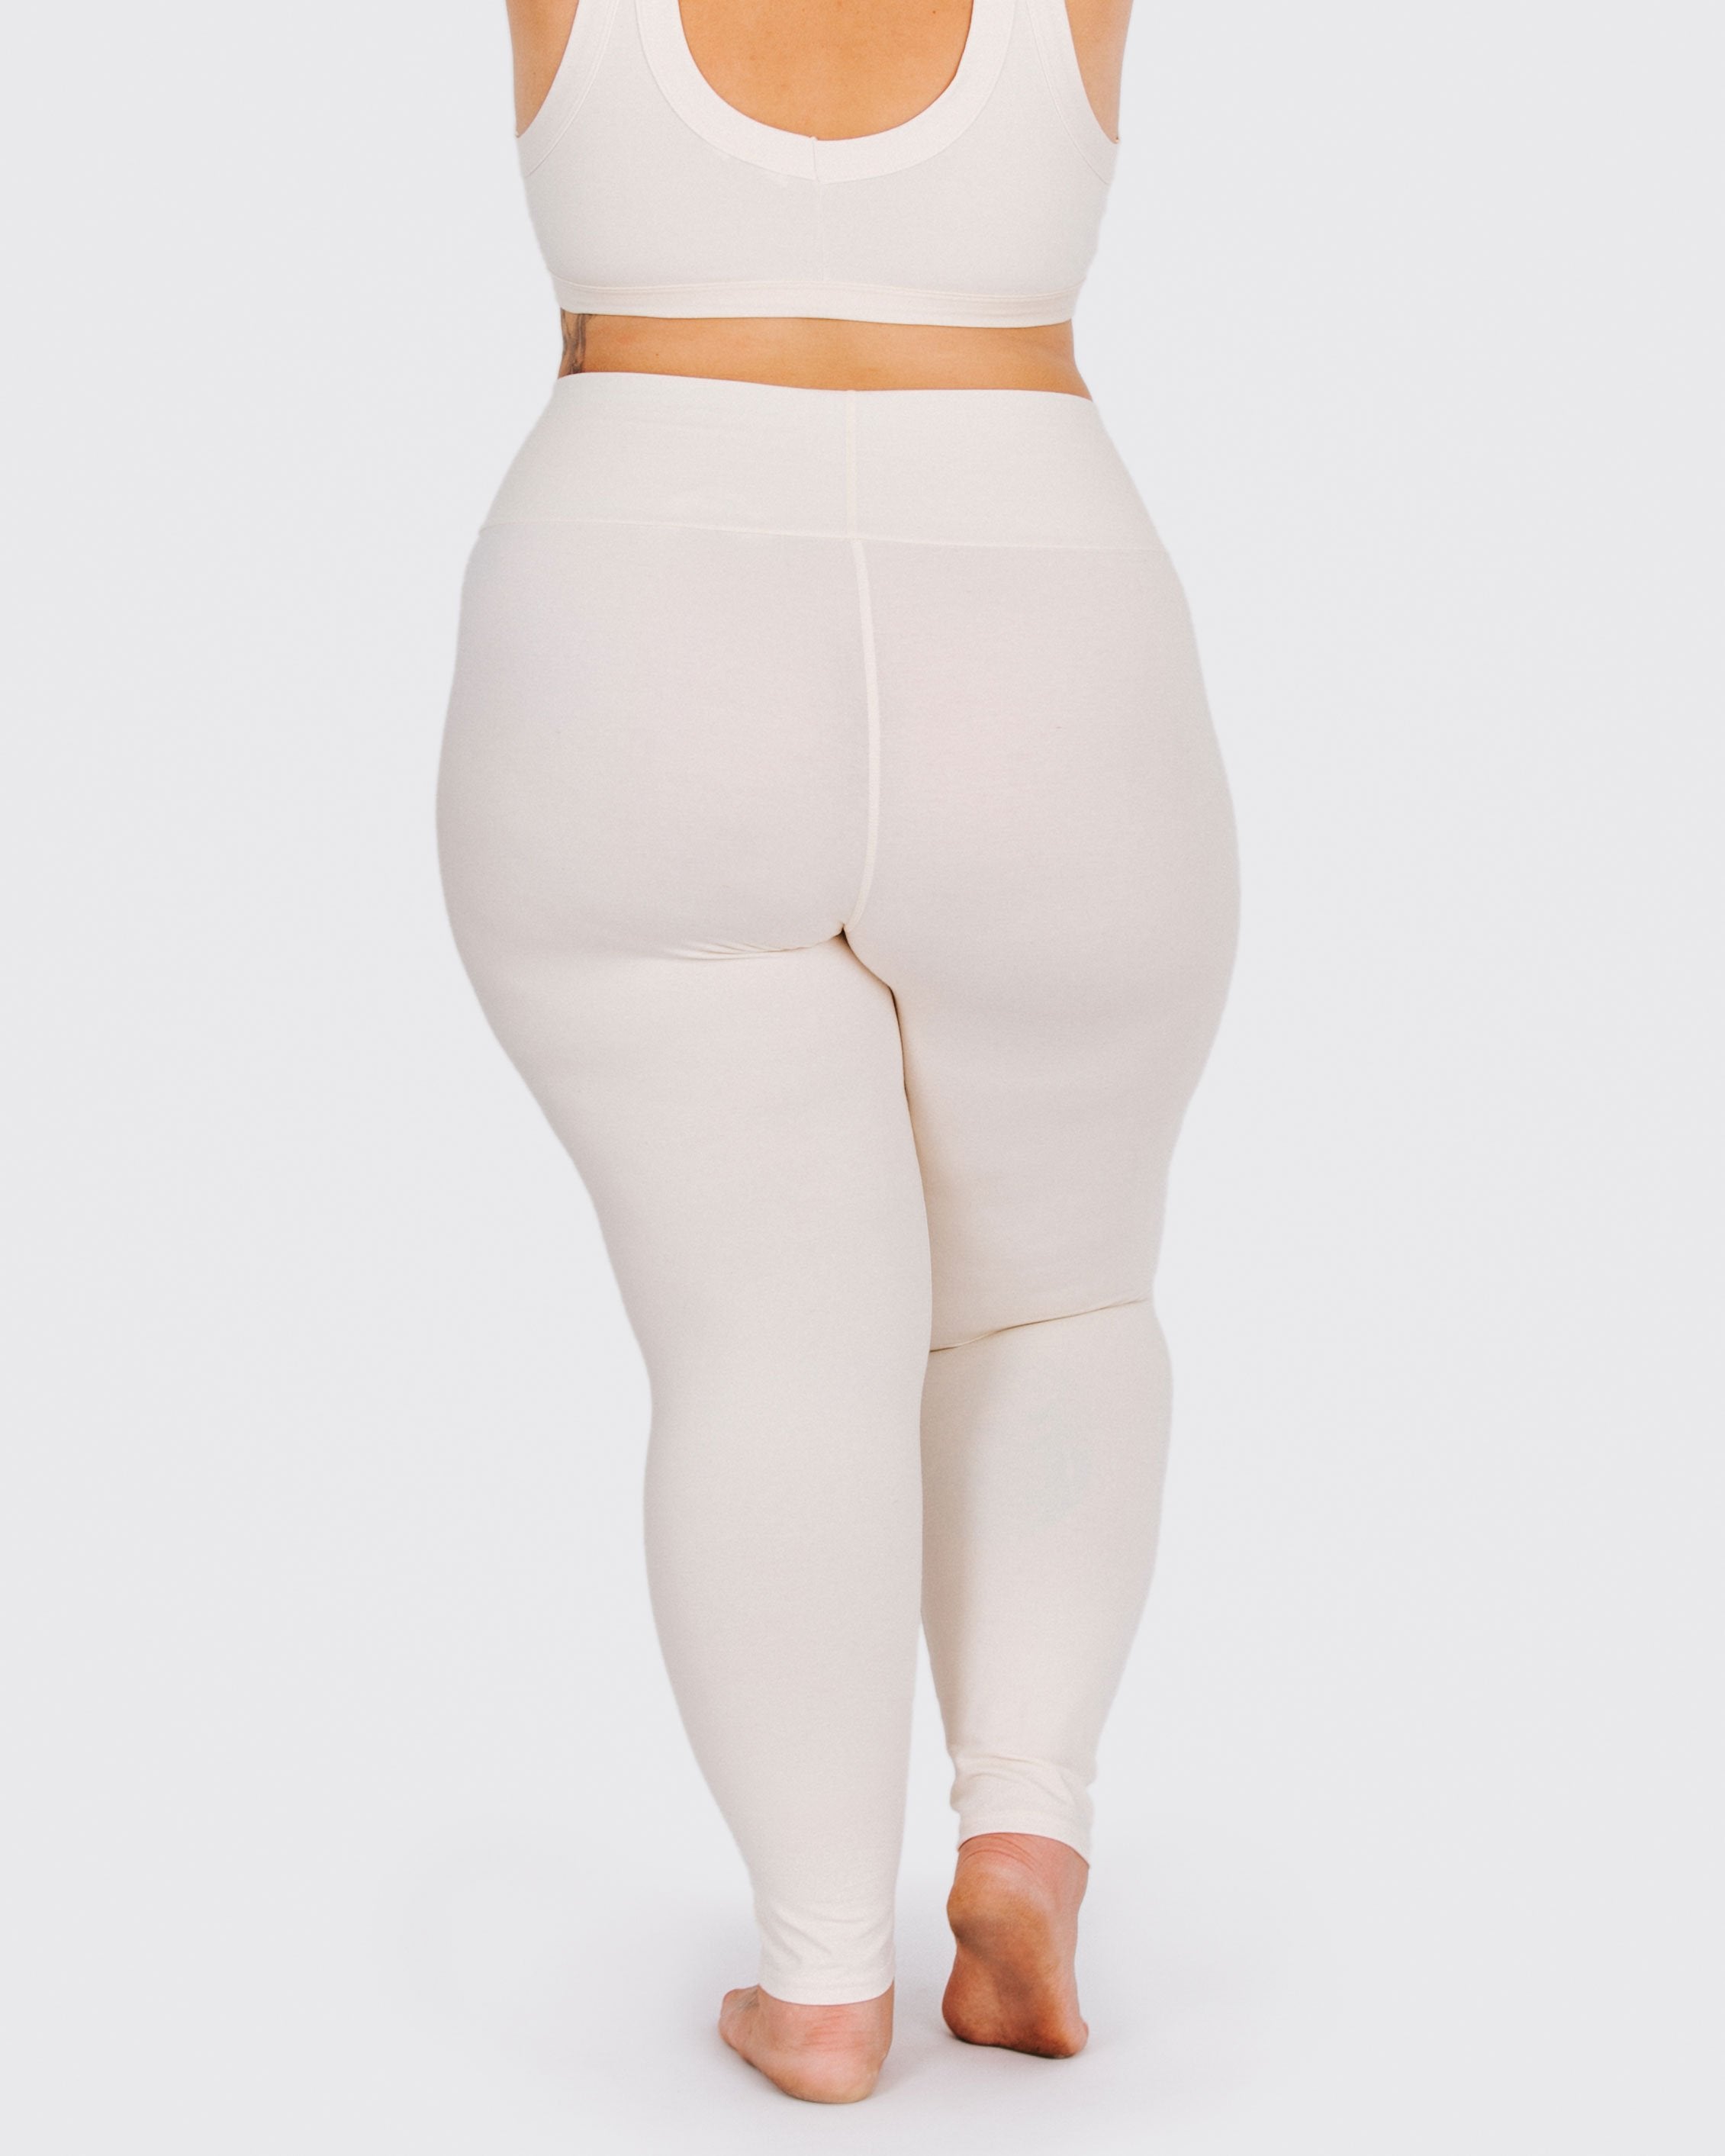 Buy Thread Plus Women's Skinny Fit Ankle Length Leggings for Women  (Color-Beige) at Amazon.in